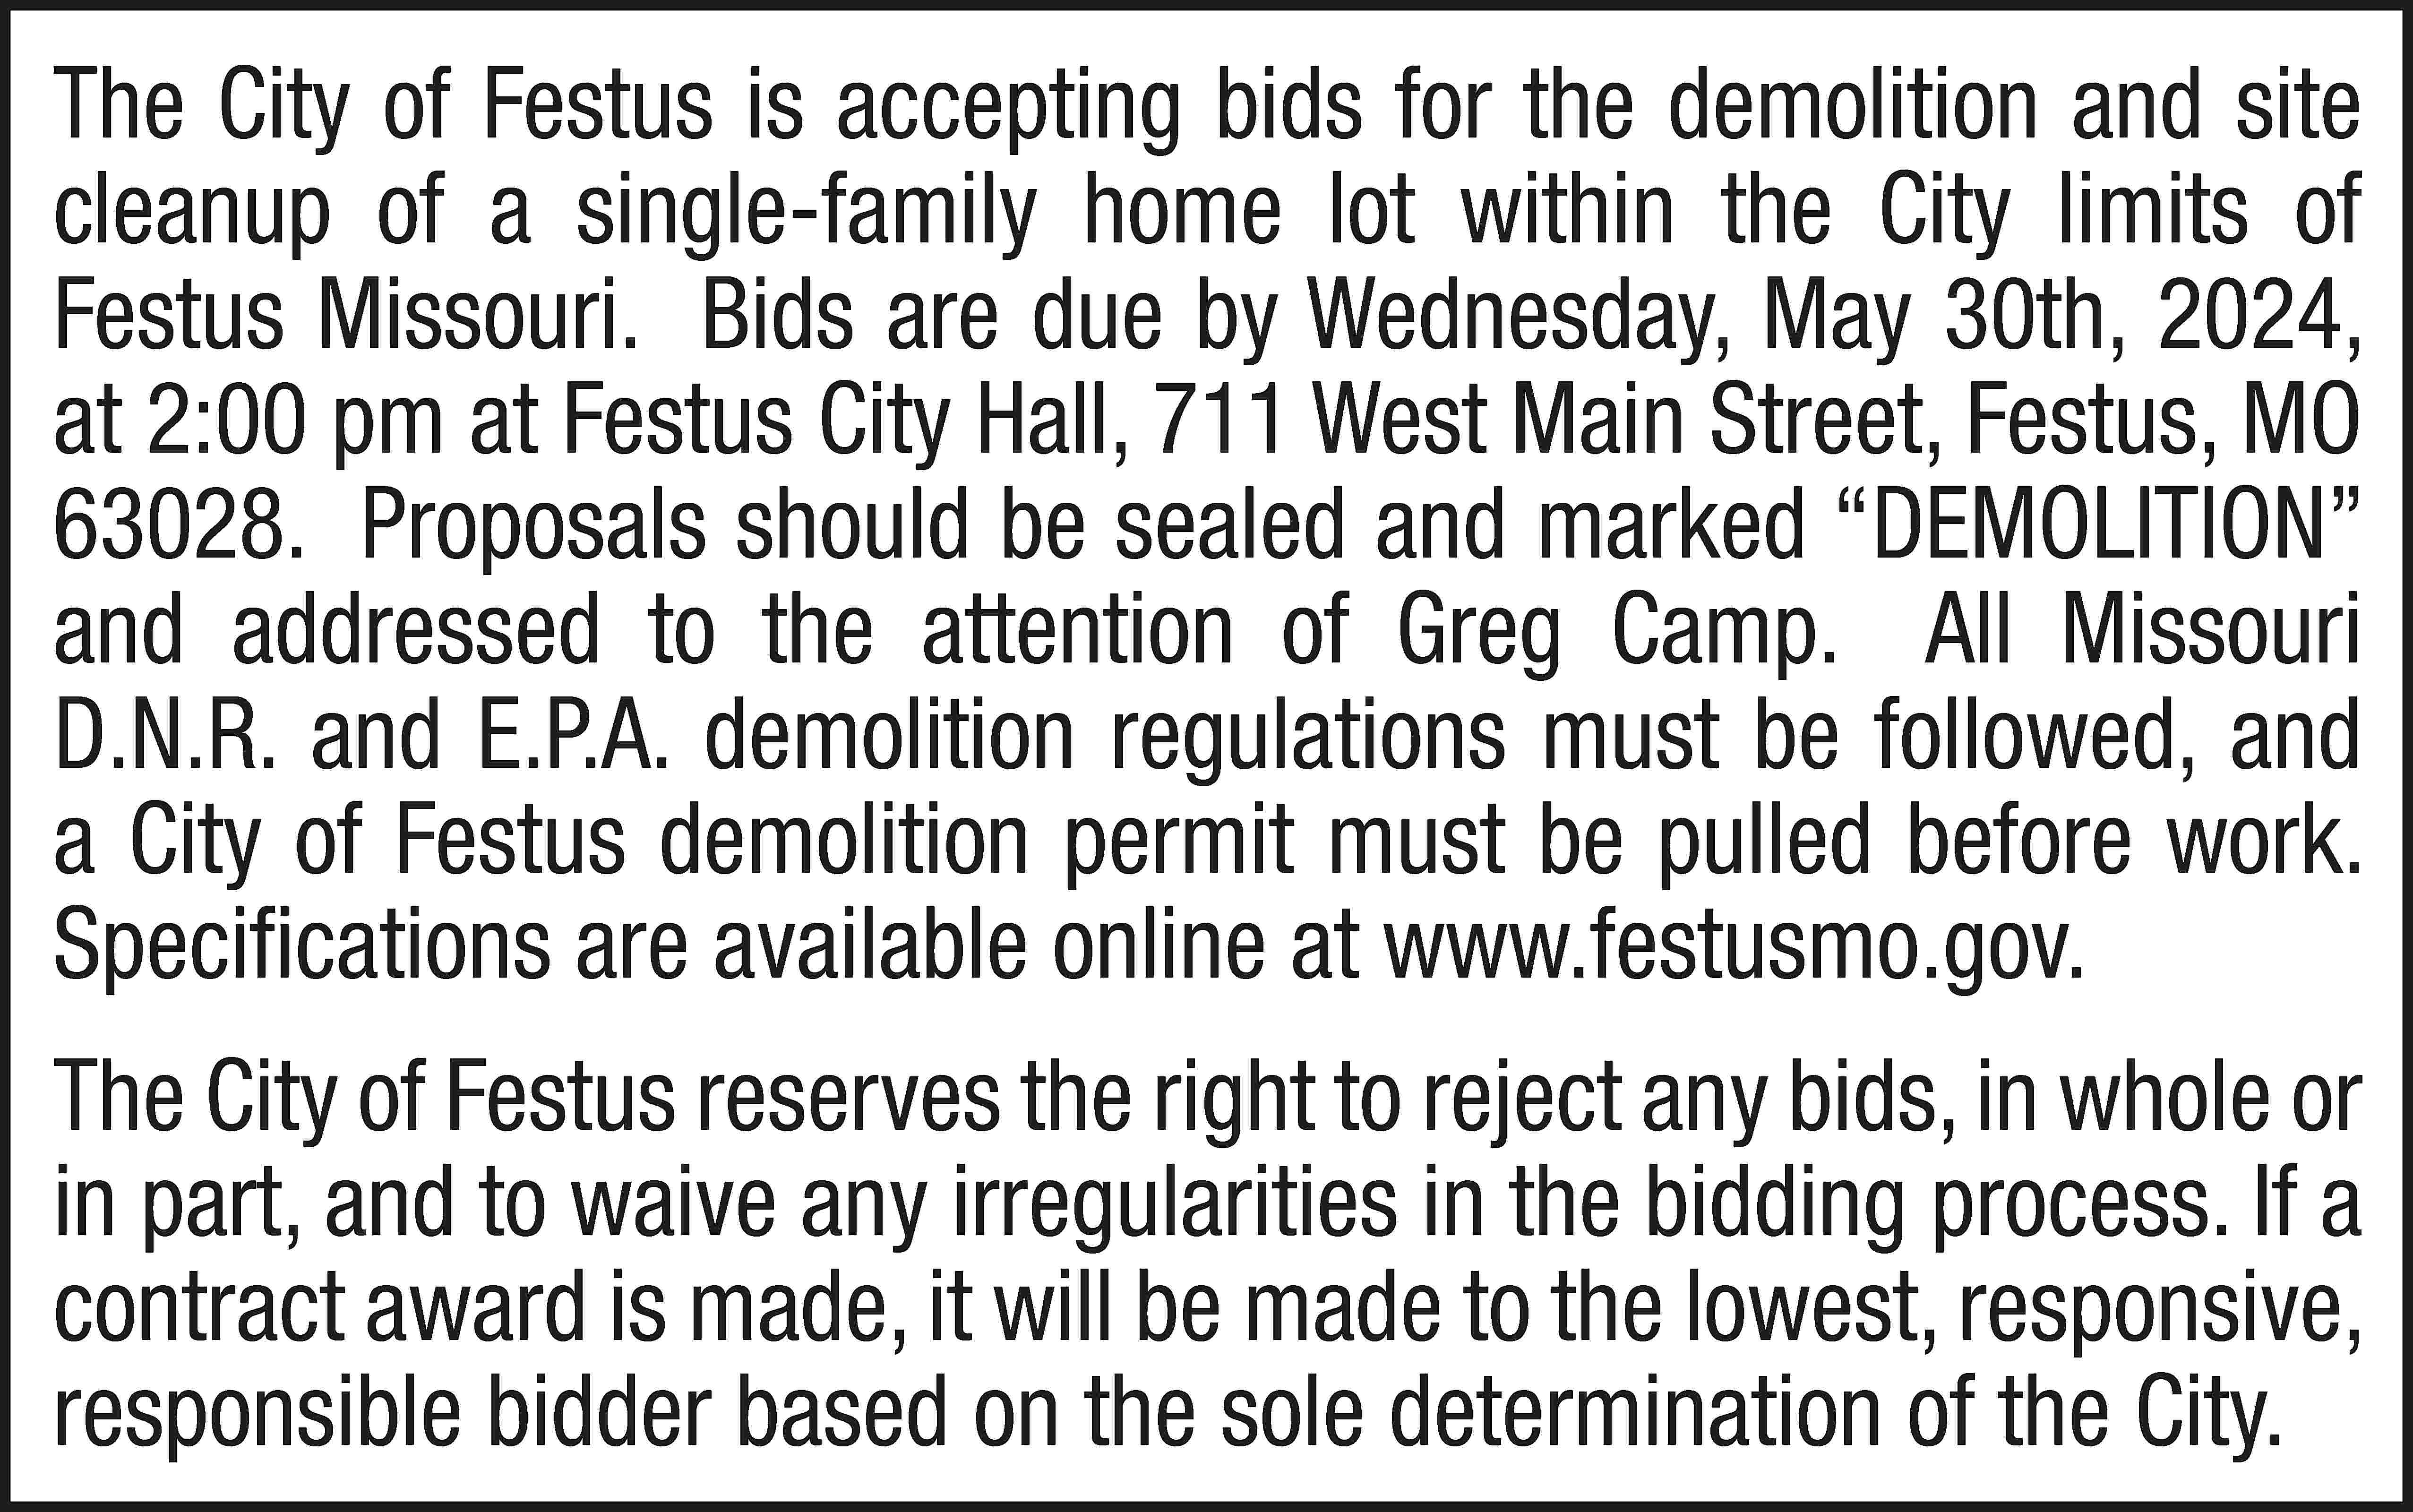 The City of Festus is  The City of Festus is accepting bids for the demolition and site cleanup of a single-family home lot within the City limits of Festus Missouri. Bids are due by Wednesday, May 30th, 2024, at 2:00 pm at Festus City Hall, 711 West Main Street, Festus, MO 63028. Proposals should be sealed and marked “DEMOLITION” and addressed to the attention of Greg Camp. All Missouri D.N.R. and E.P.A. demolition regulations must be followed, and a City of Festus demolition permit must be pulled before work. Specifications are available online at www.festusmo.gov. The City of Festus reserves the right to reject any bids, in whole or in part, and to waive any irregularities in the bidding process. If a contract award is made, it will be made to the lowest, responsive, responsible bidder based on the sole determination of the City.